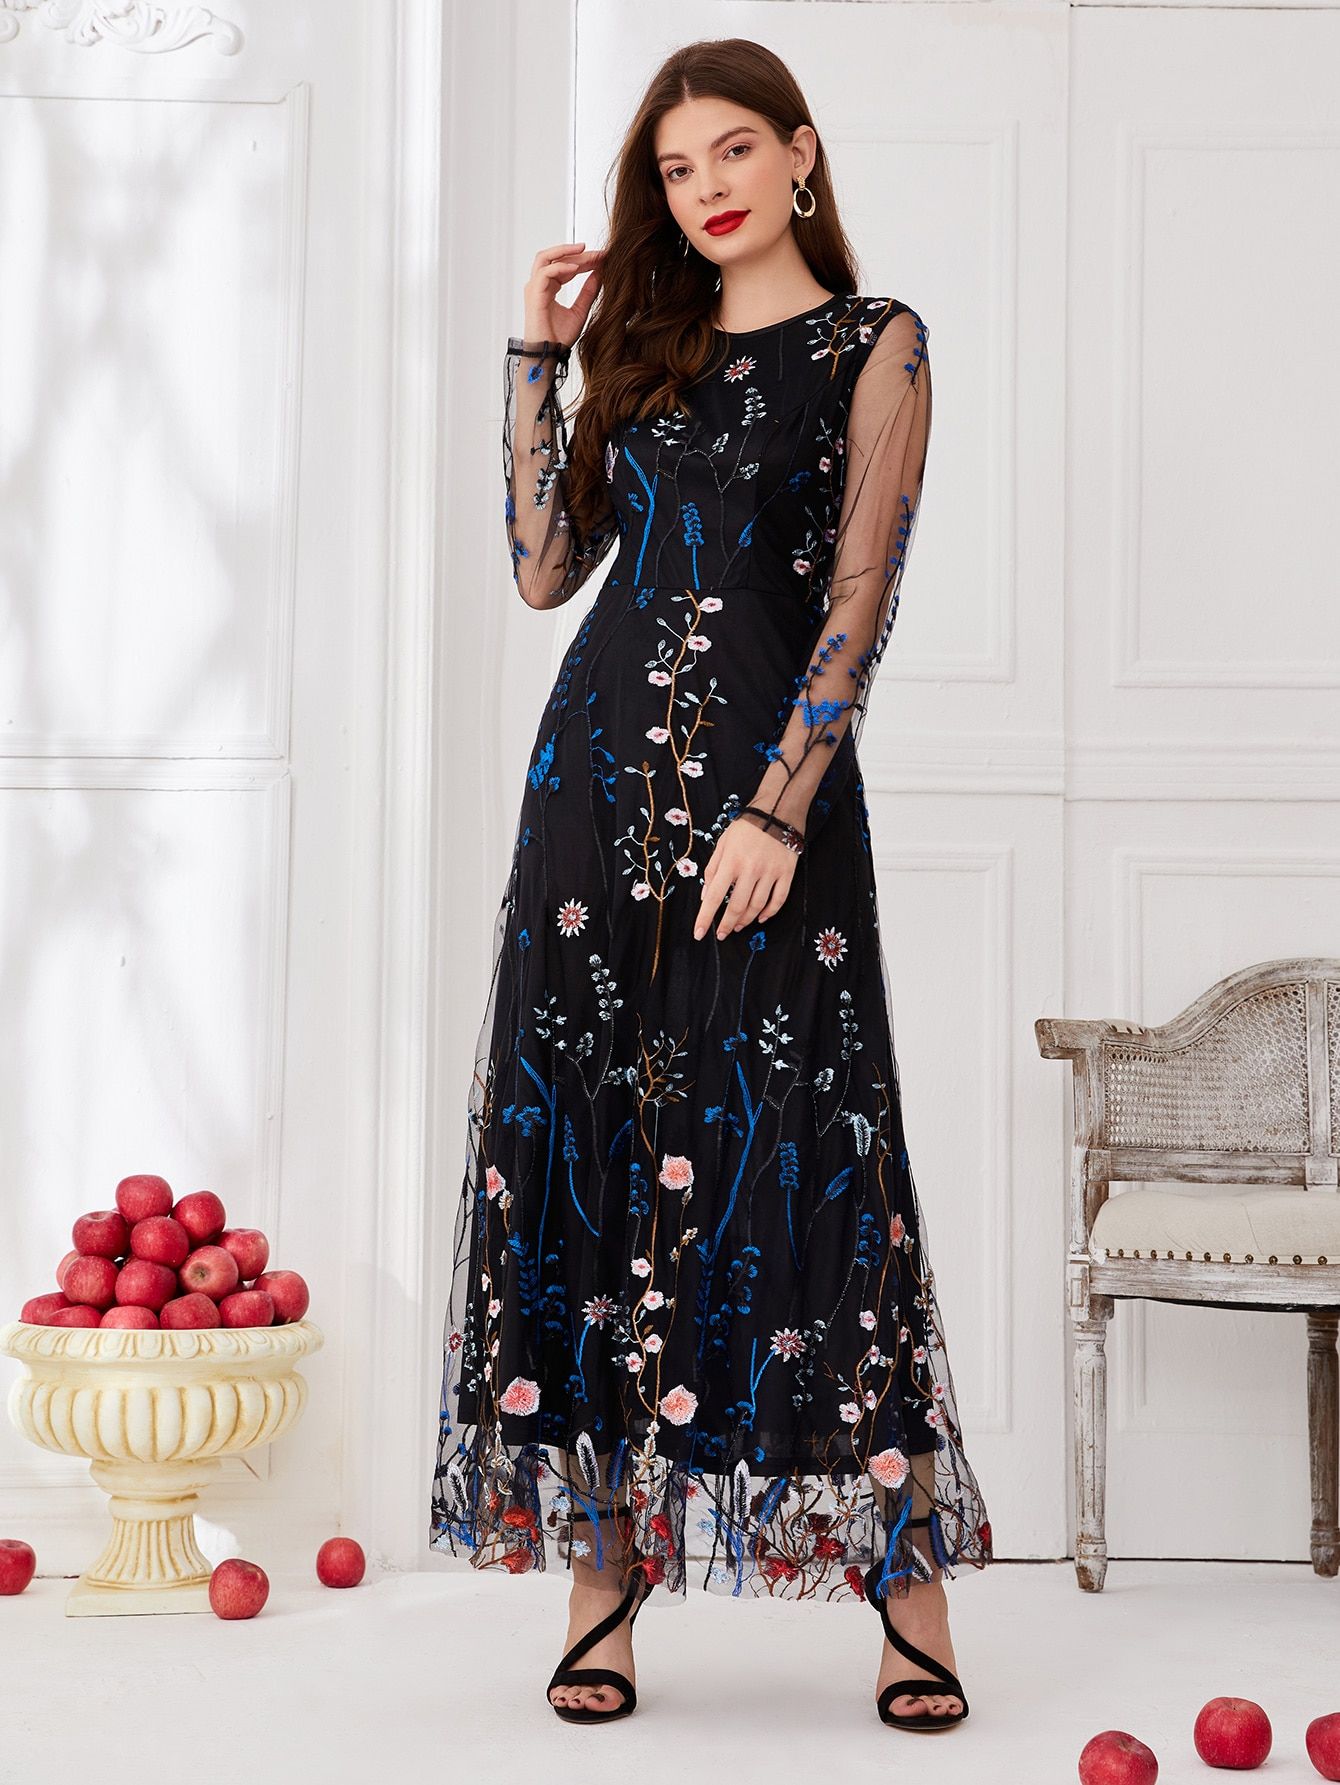 Floral Embroidery Mesh Overlay Dress | SHEIN